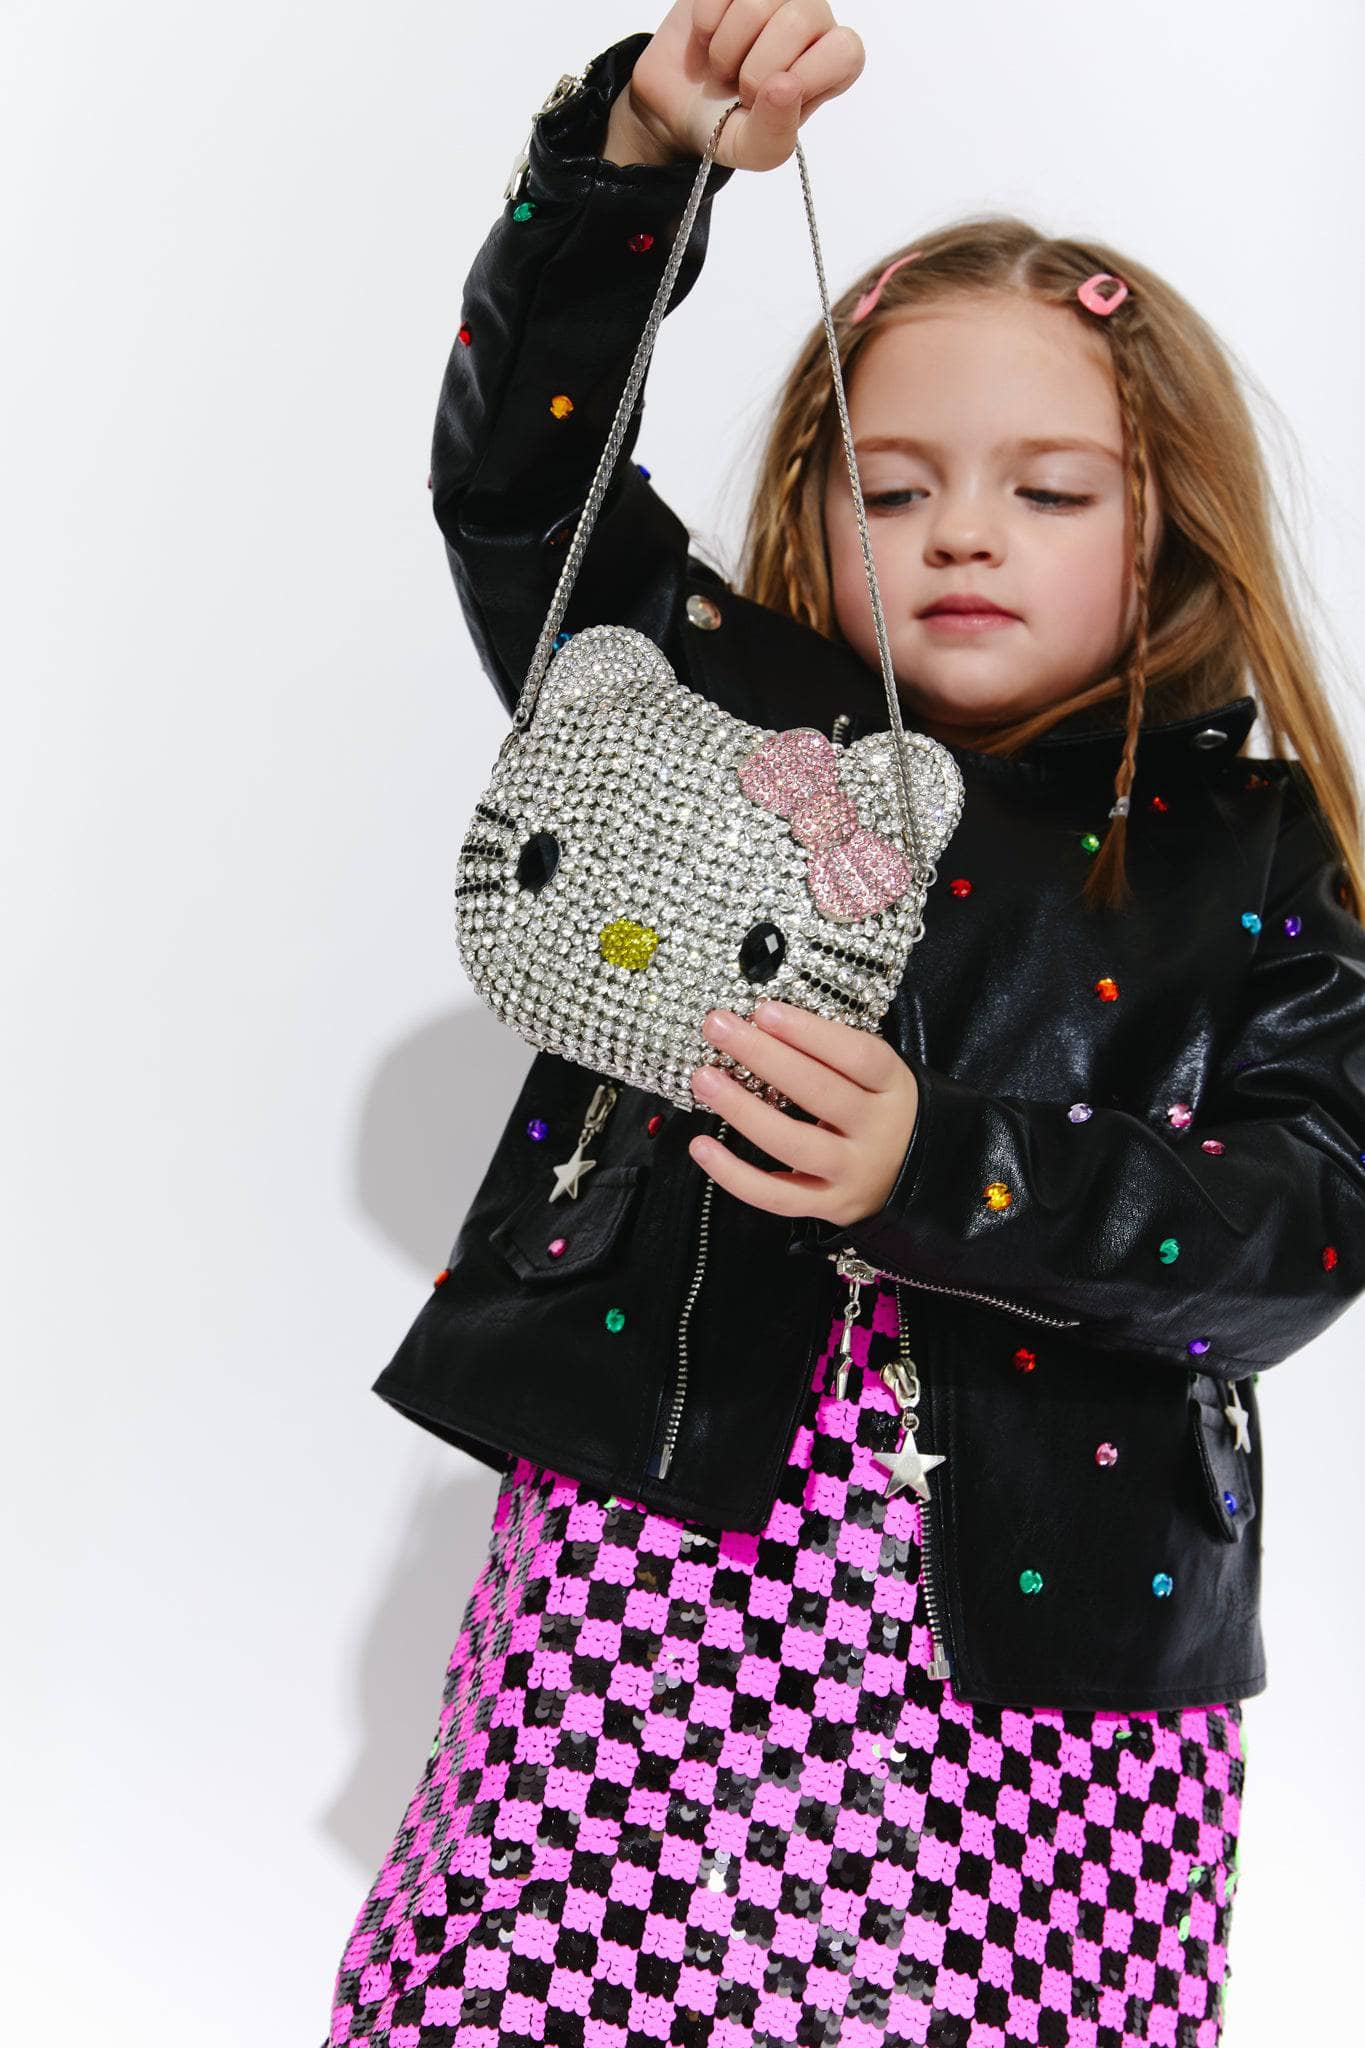 The Latest Playboy x Hello Kitty Purse & Bag Collection is both Cute & Edgy